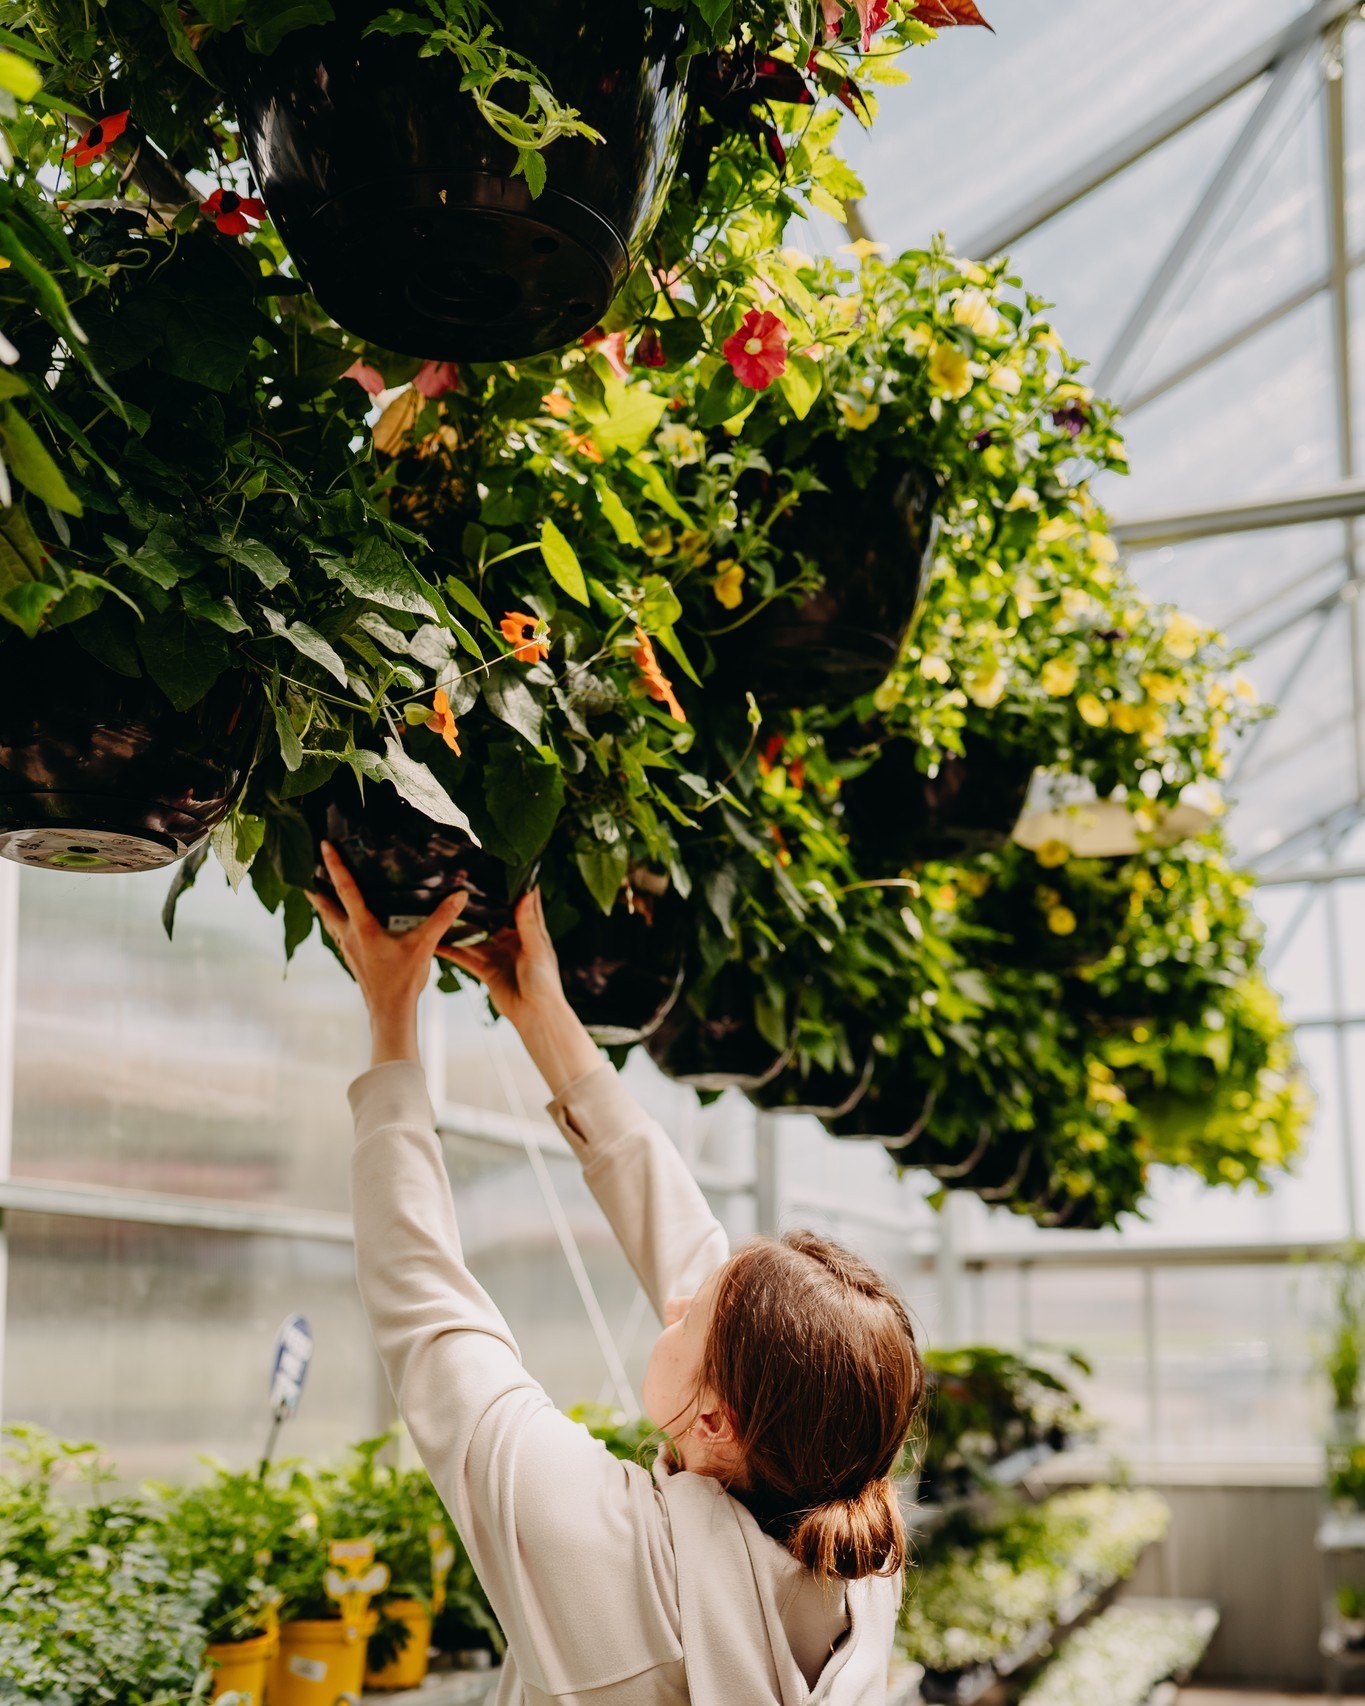 Our hanging baskets are unmatched! Perfect for adding a touch of vibrant beauty to any space. 

Each basket has been lovingly nurtured by our dedicated staff, who have spent countless hours ensuring they are healthy, lush, and ready to thrive in your